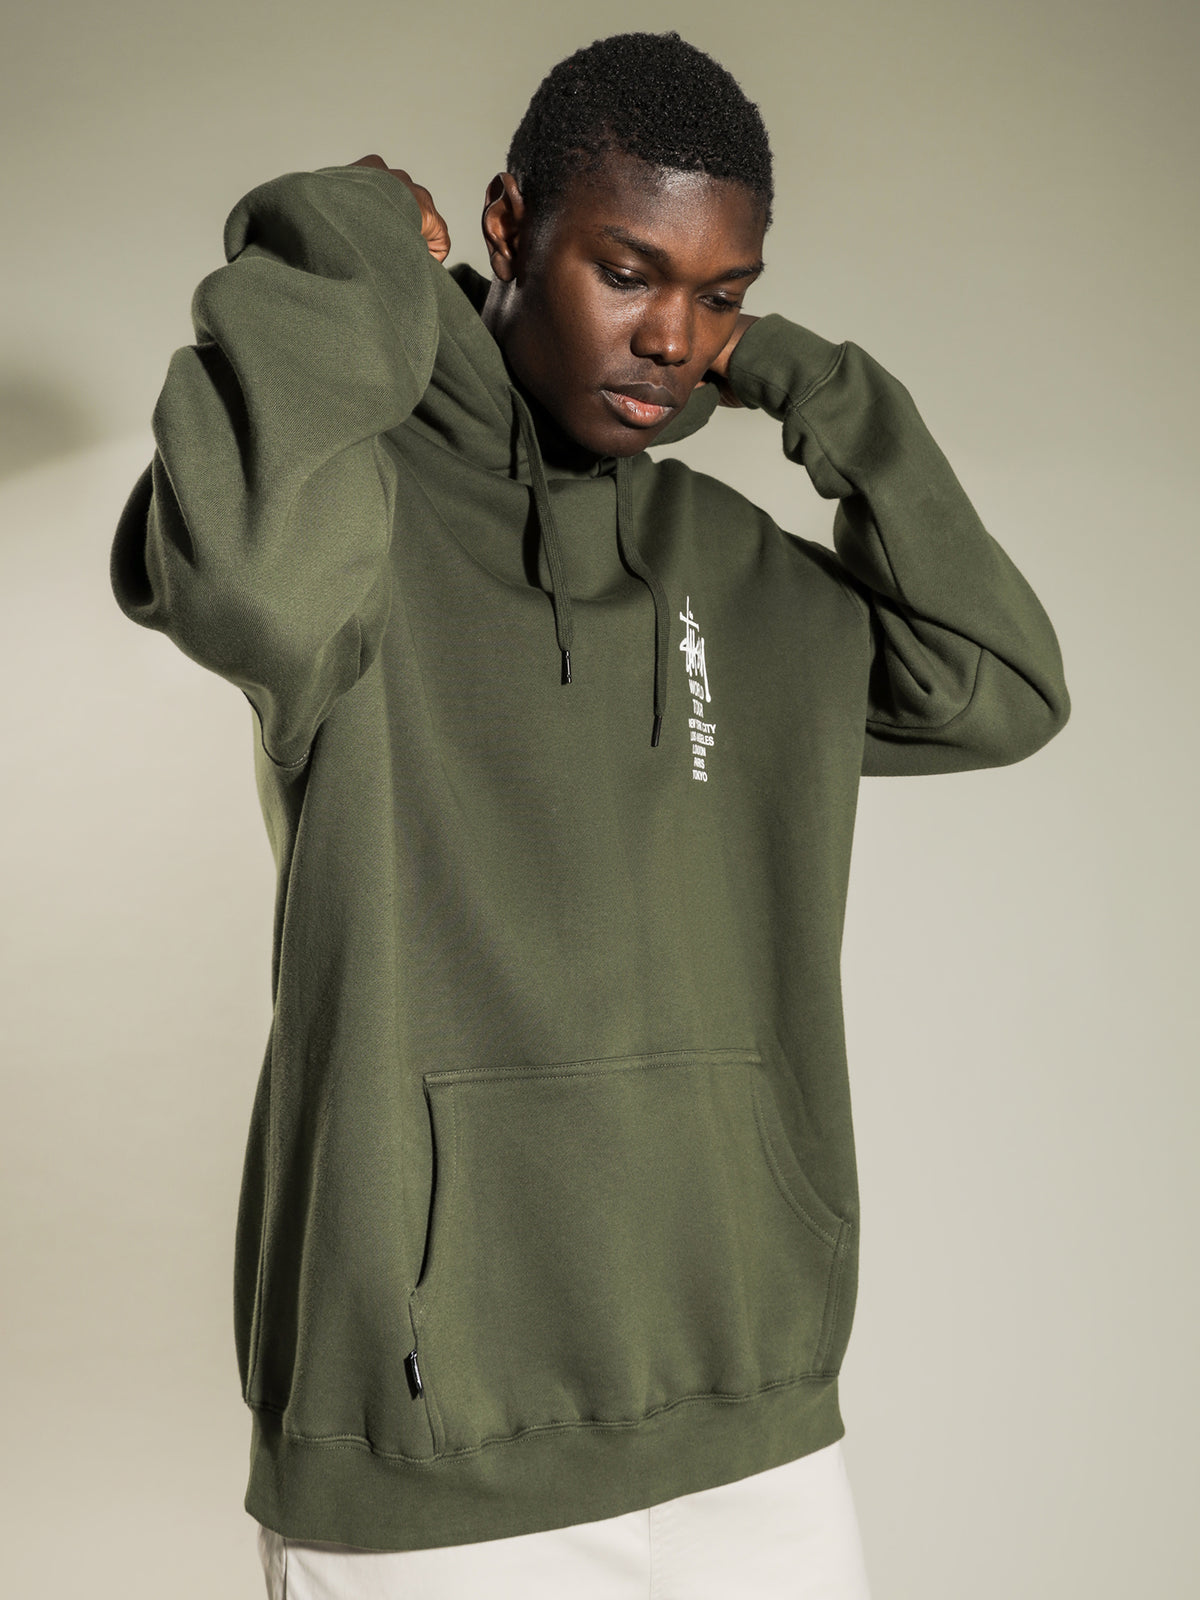 World Tour Hoodie in Green